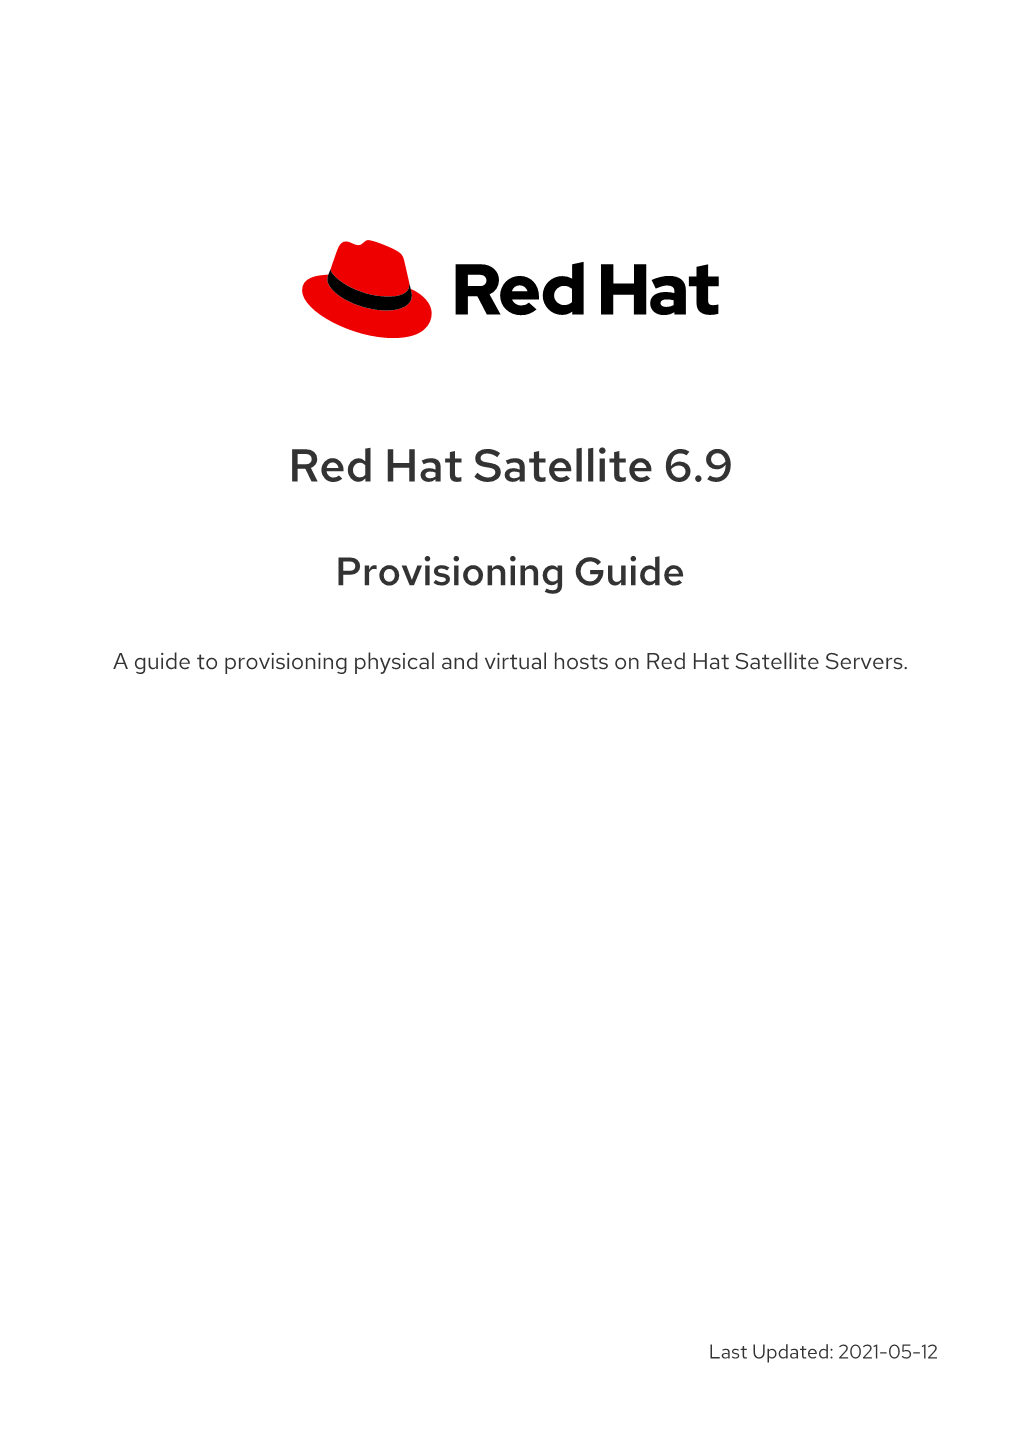 Red Hat Satellite 6.9 Provisioning Guide